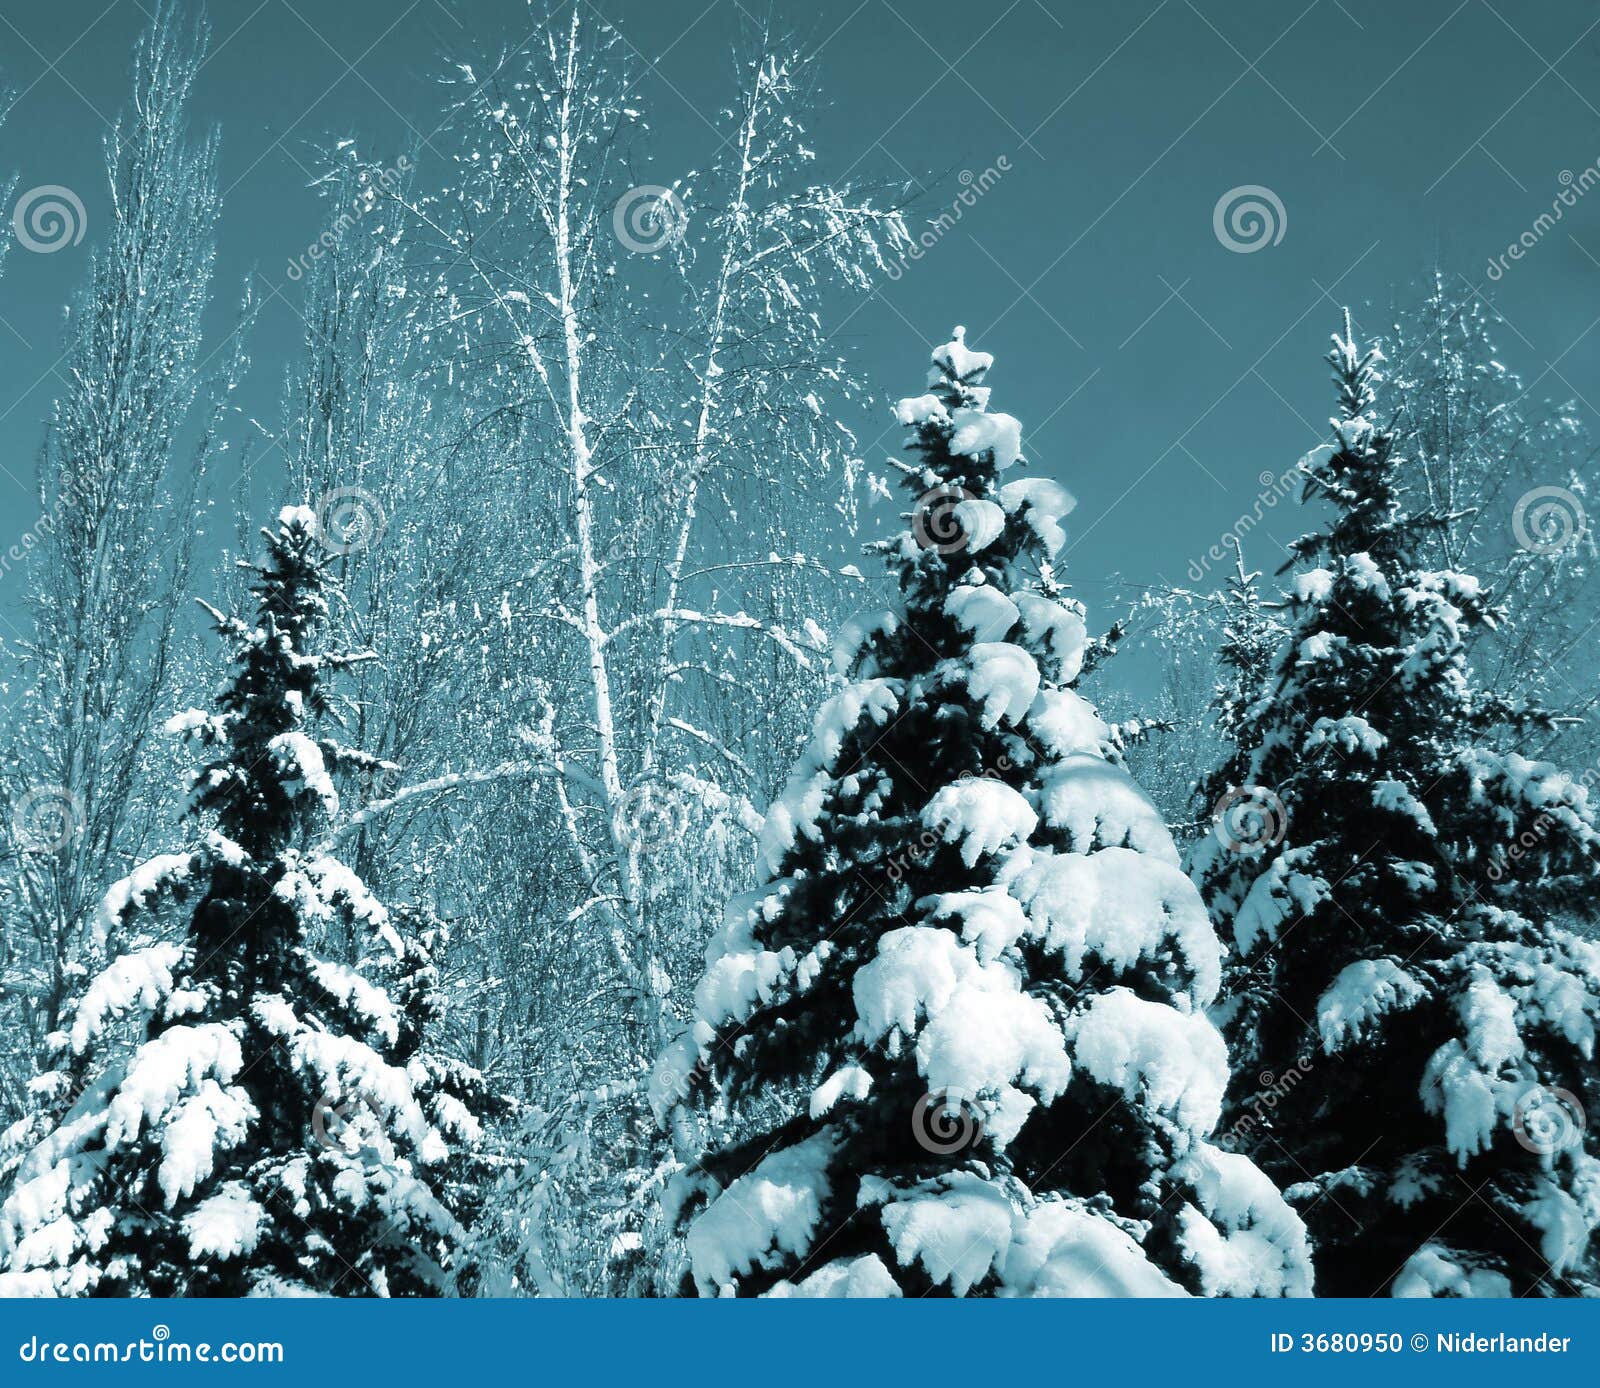 snow-covered evergreens